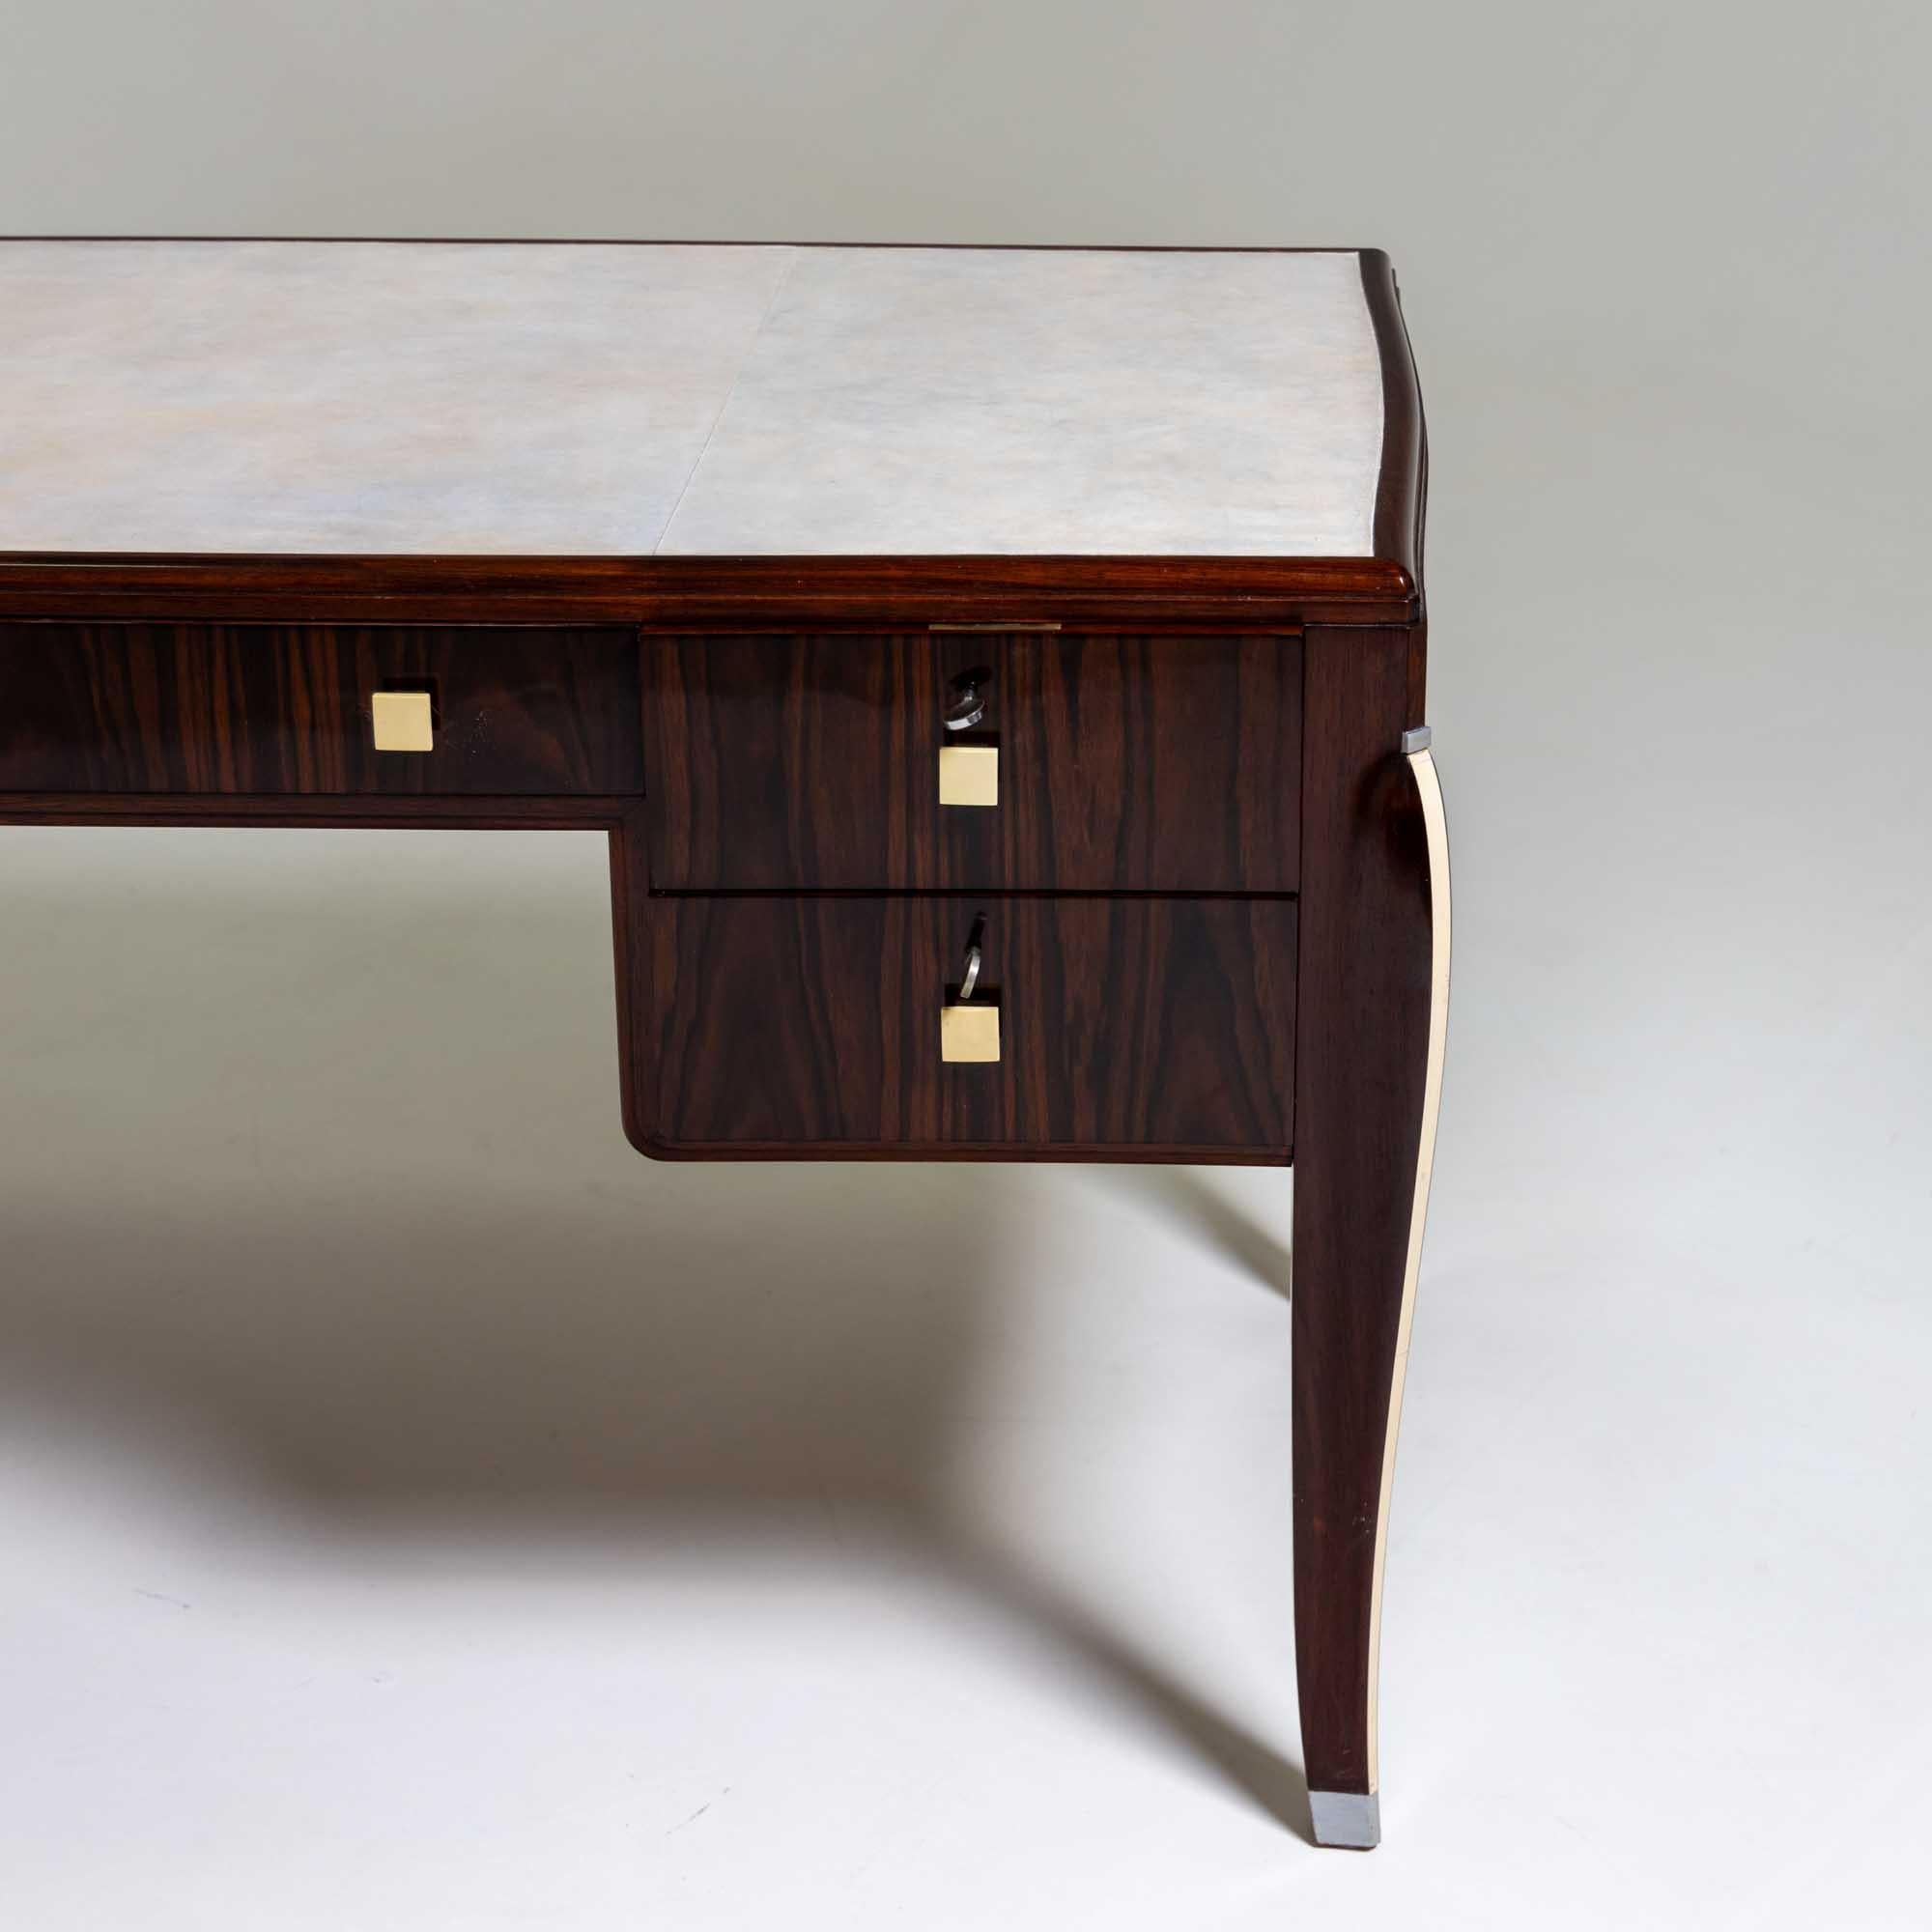 Early 20th Century Art Deco Desk in the style of Jacques-Emile Ruhlmann (1879-1933), France, 1920s For Sale